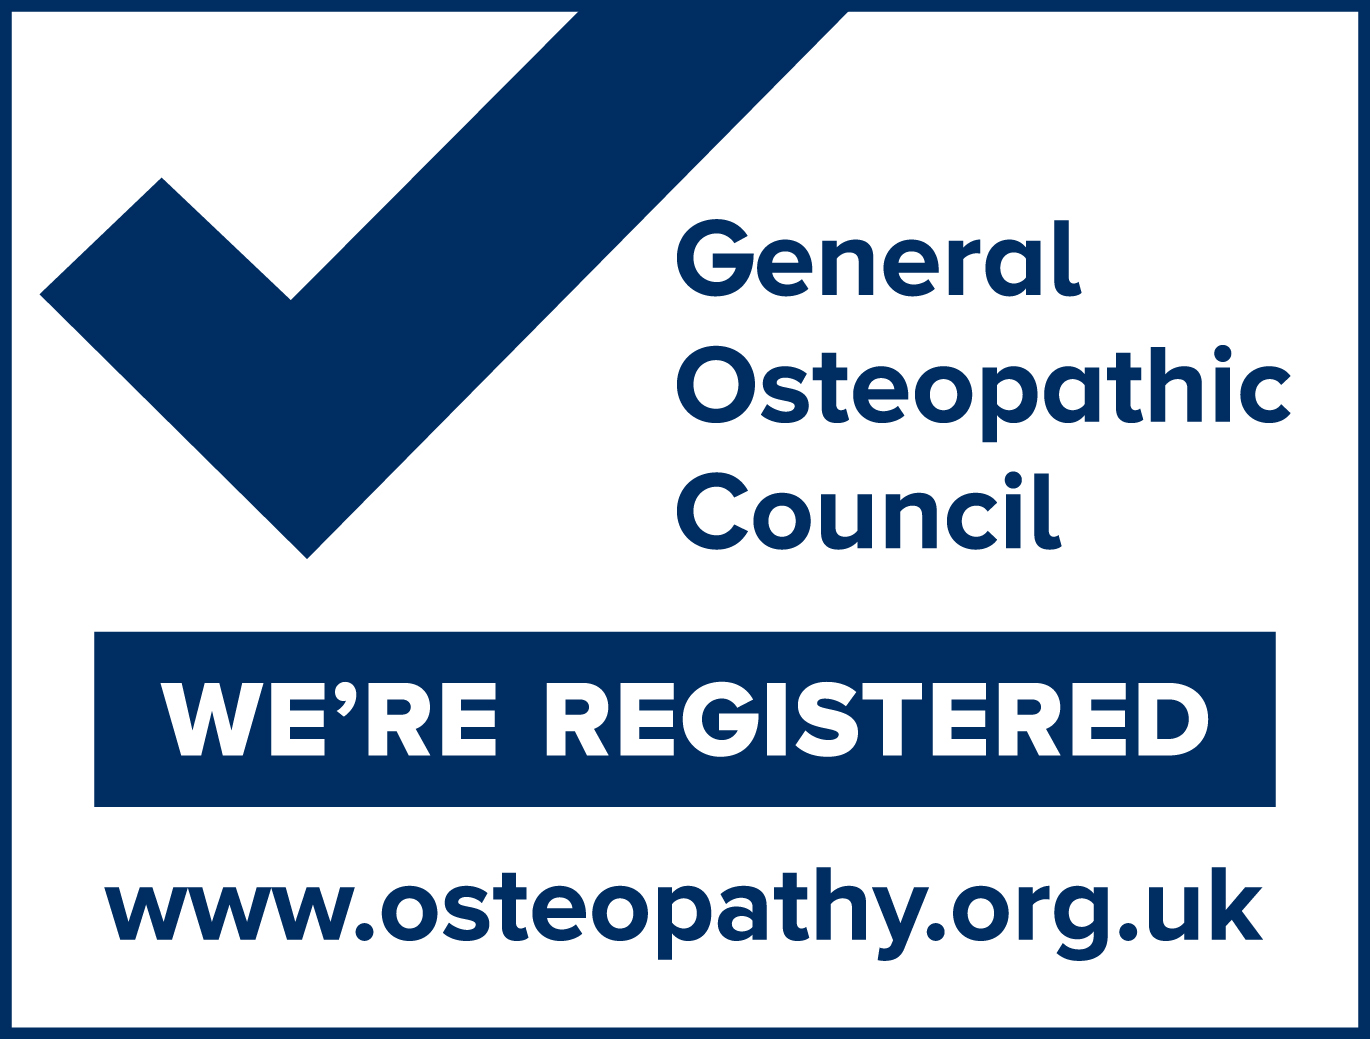 Badge indicating that Okehampton Osteopathic Clinic is registered with the General Osteopathic Council